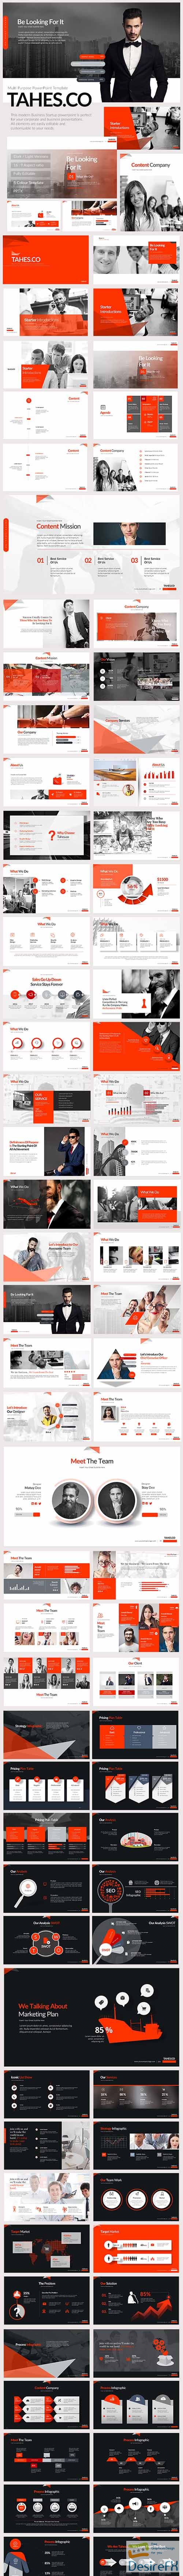 GR - Tahes.Co PowerPoint Template 21345569